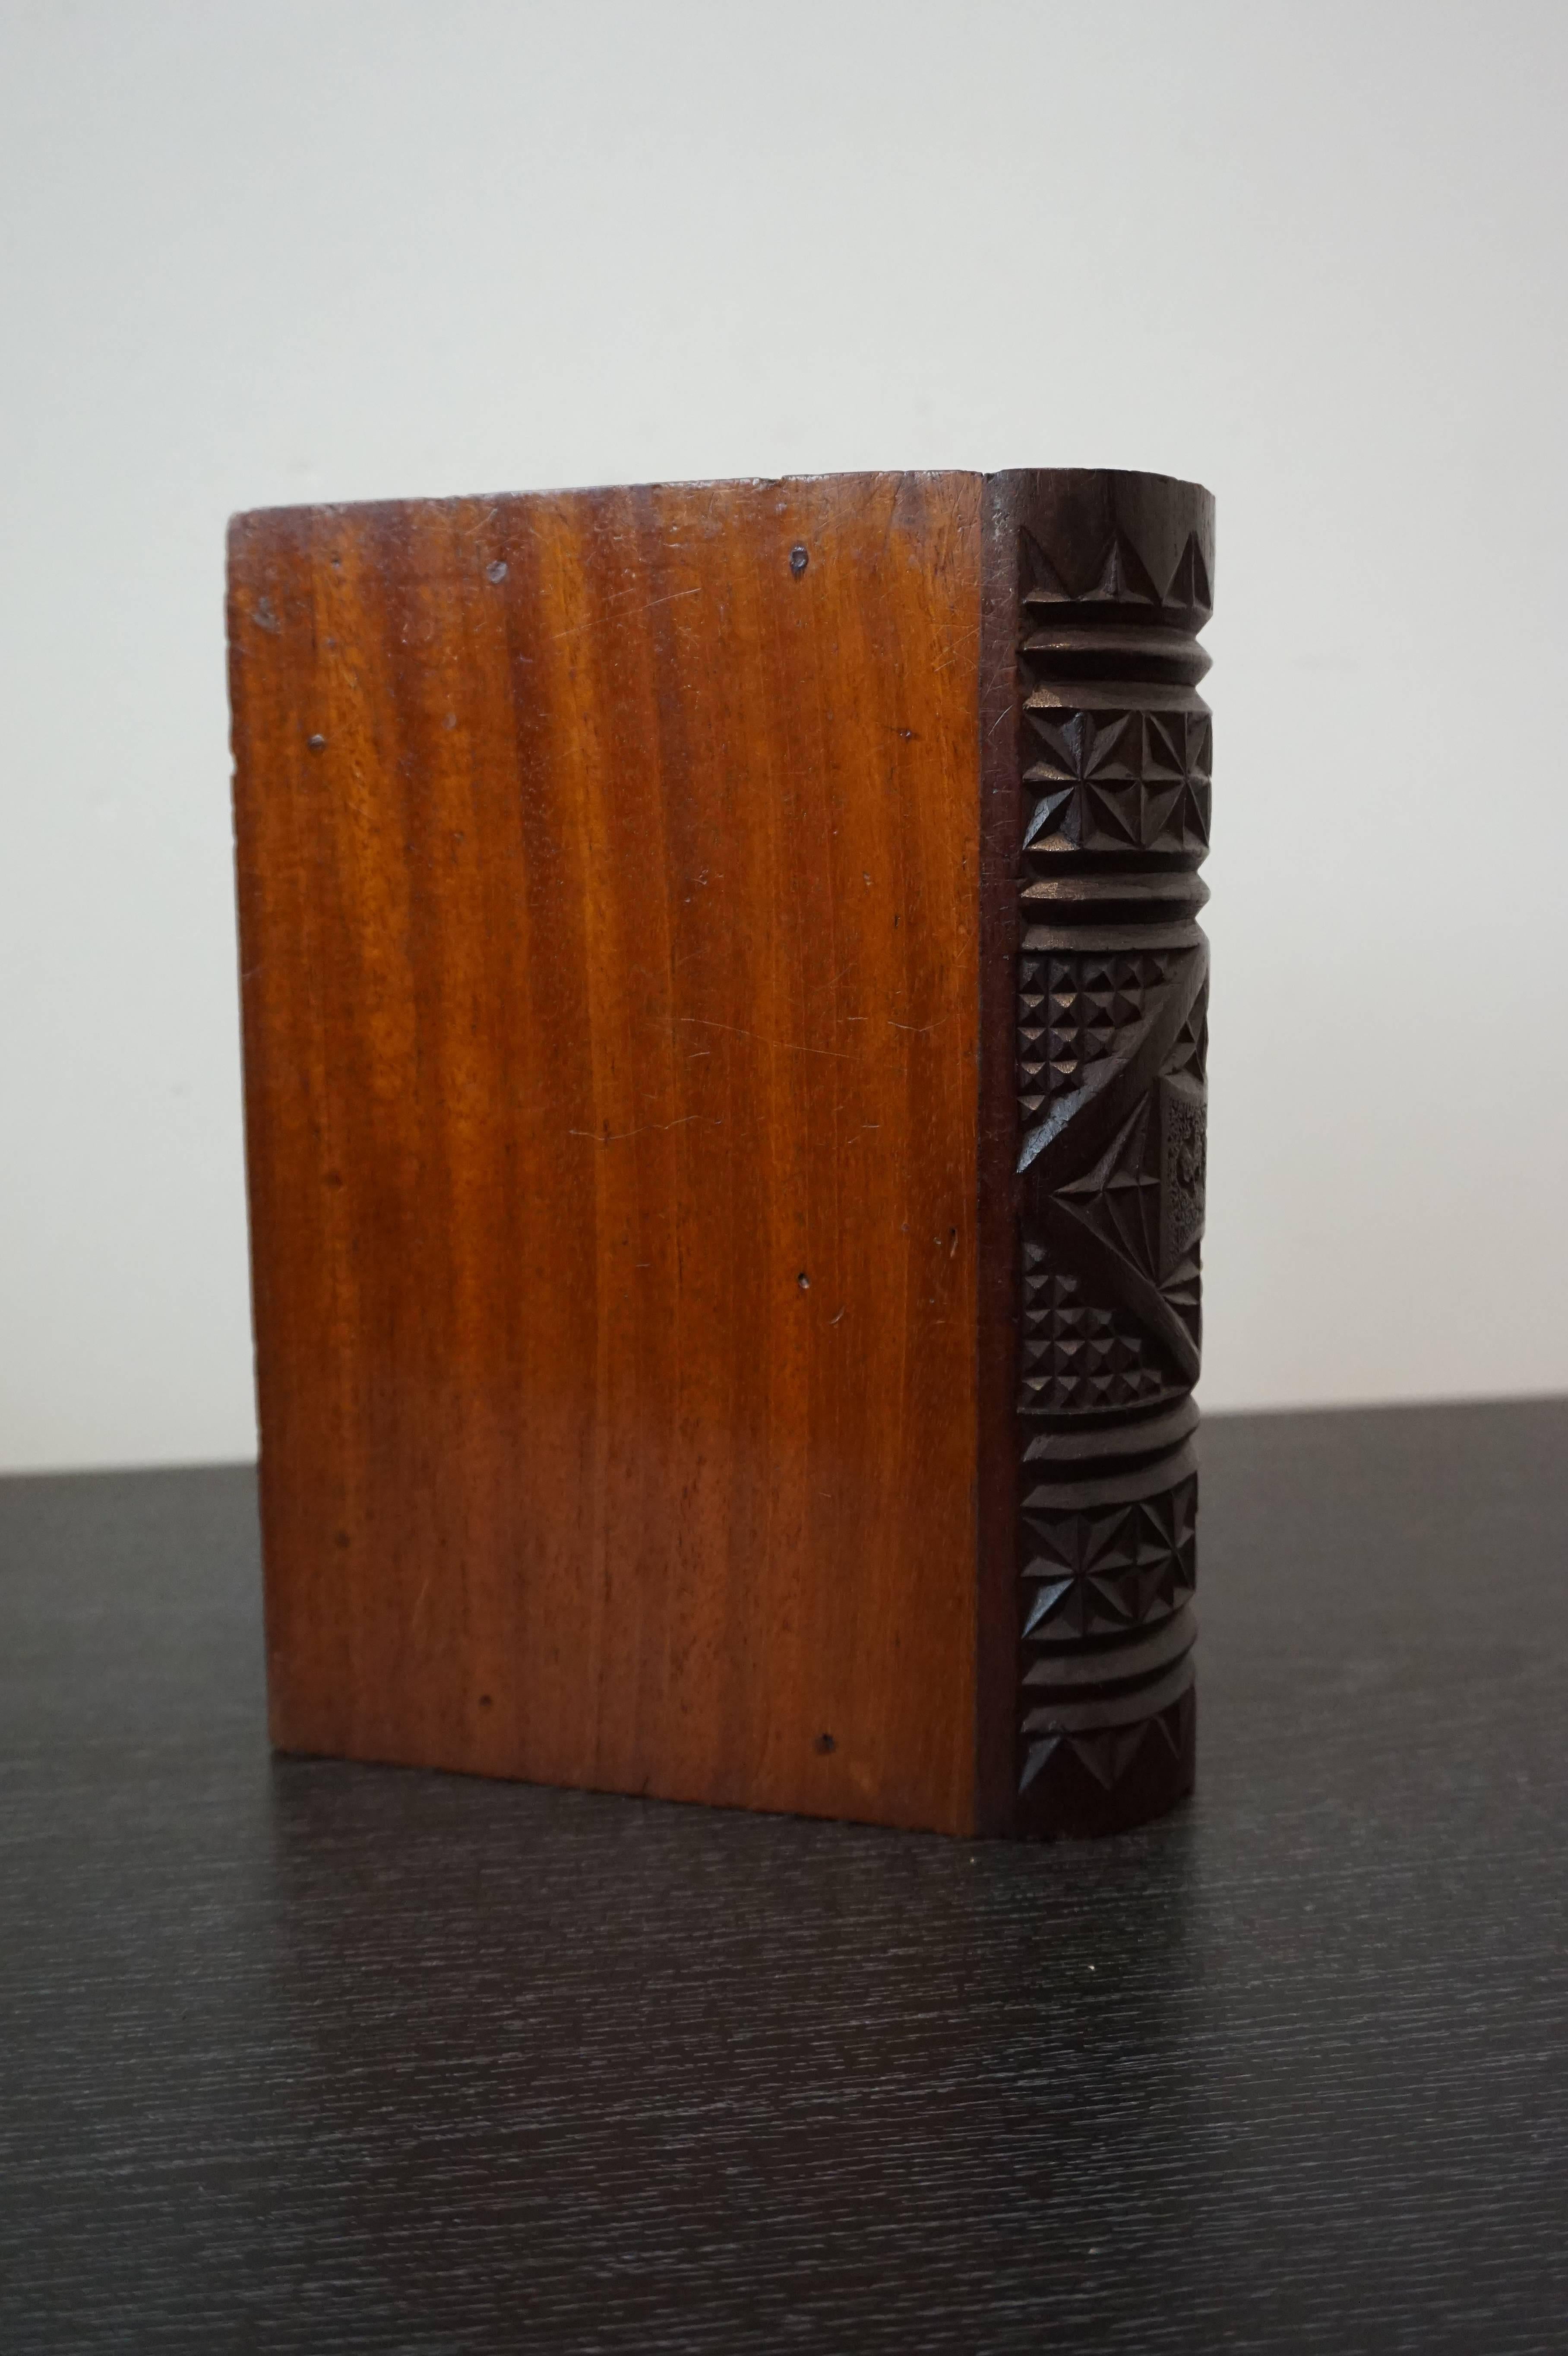 Hand-Carved Rare mid 19th Century Carved Mahogany German Kerbschnitt Book Shaped Jewelry Box